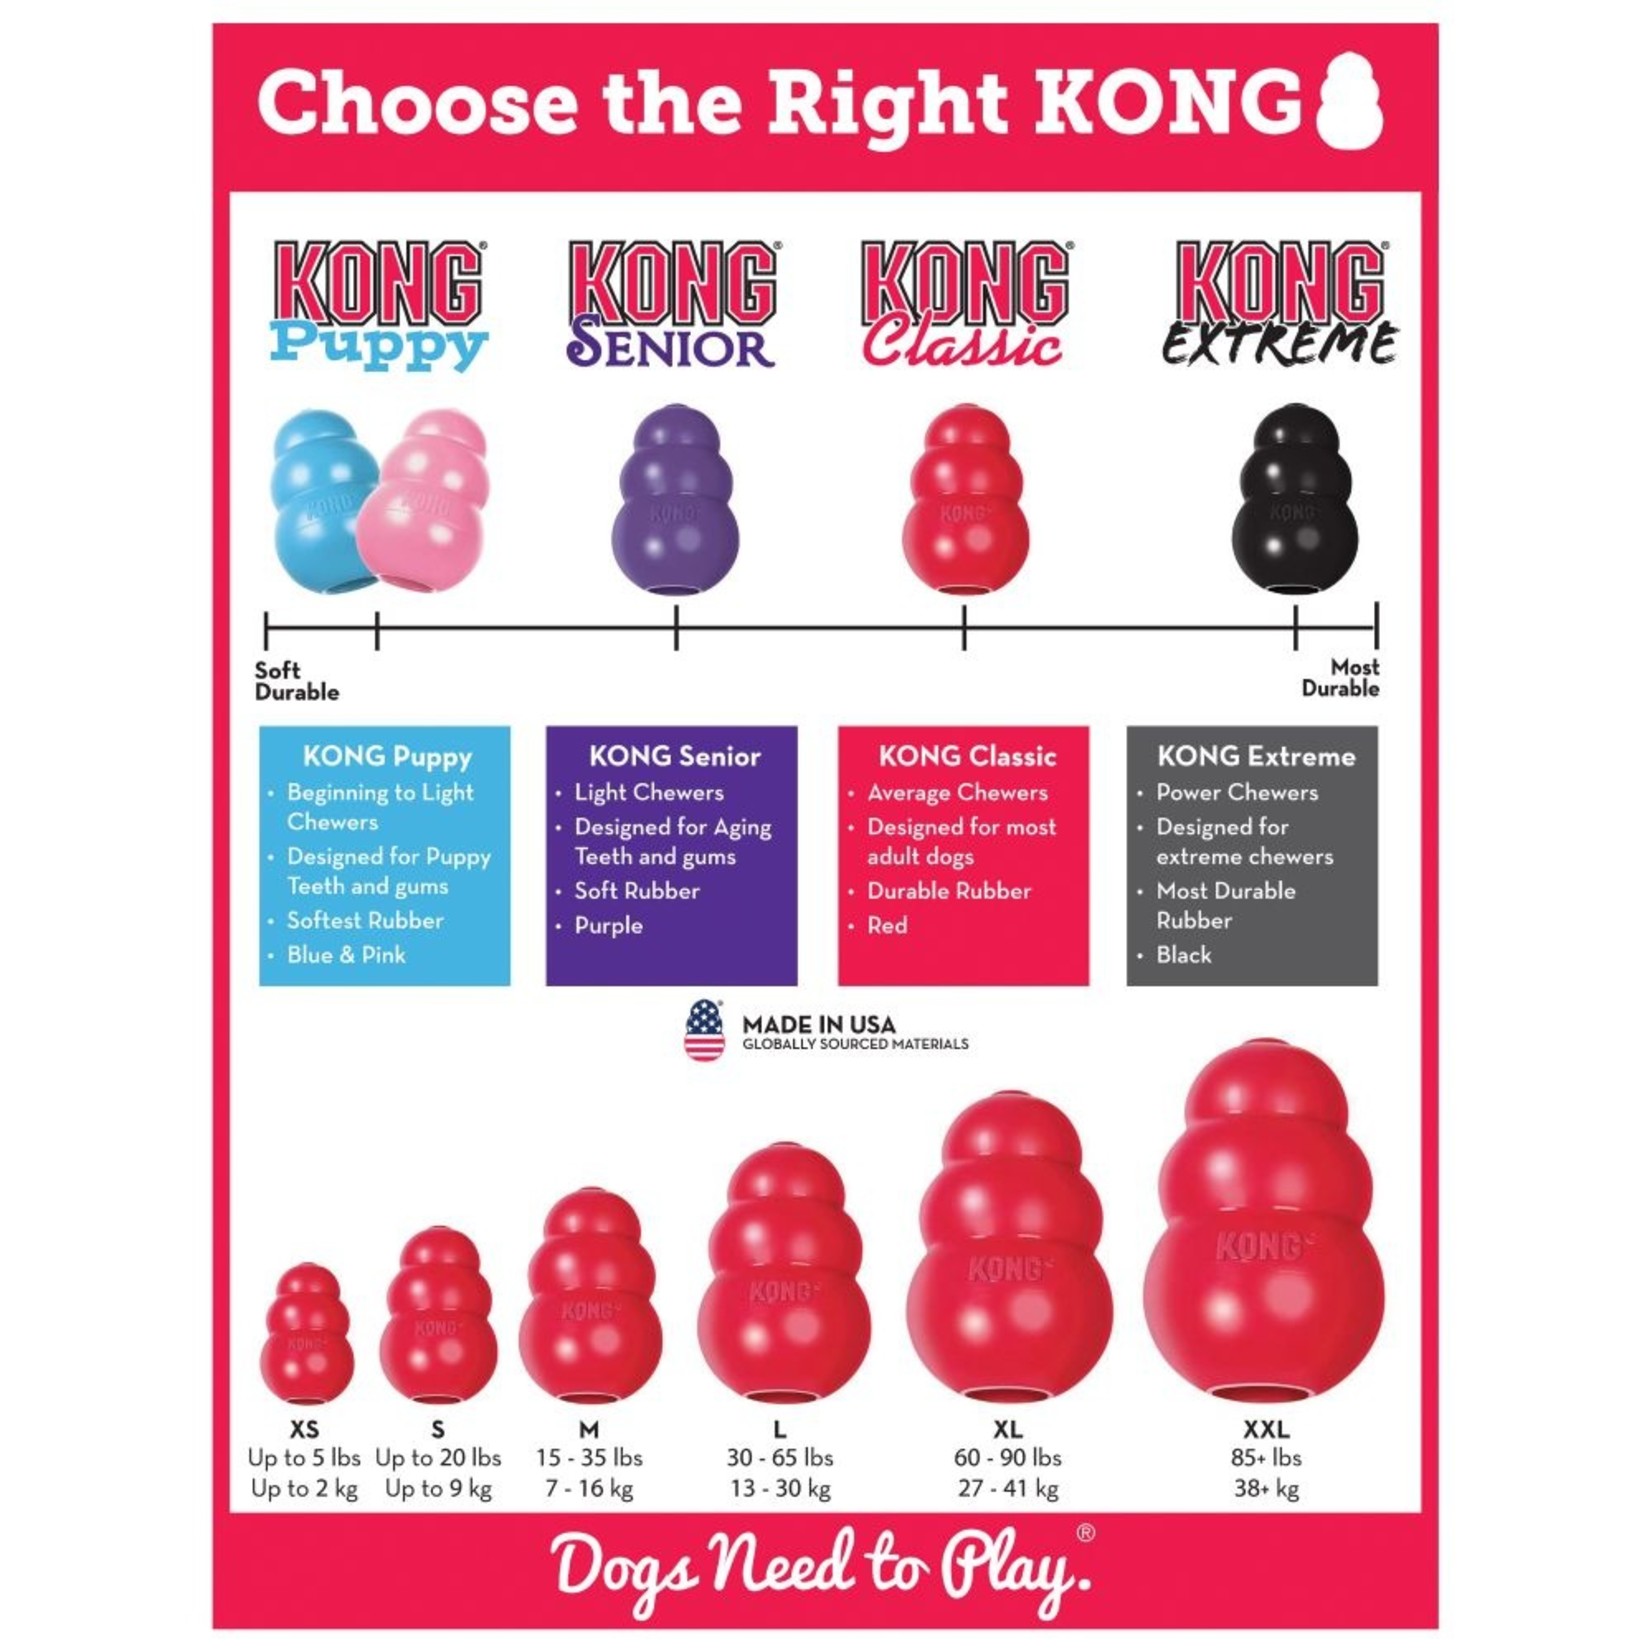 Kong Kong Classic Dog Toy Red